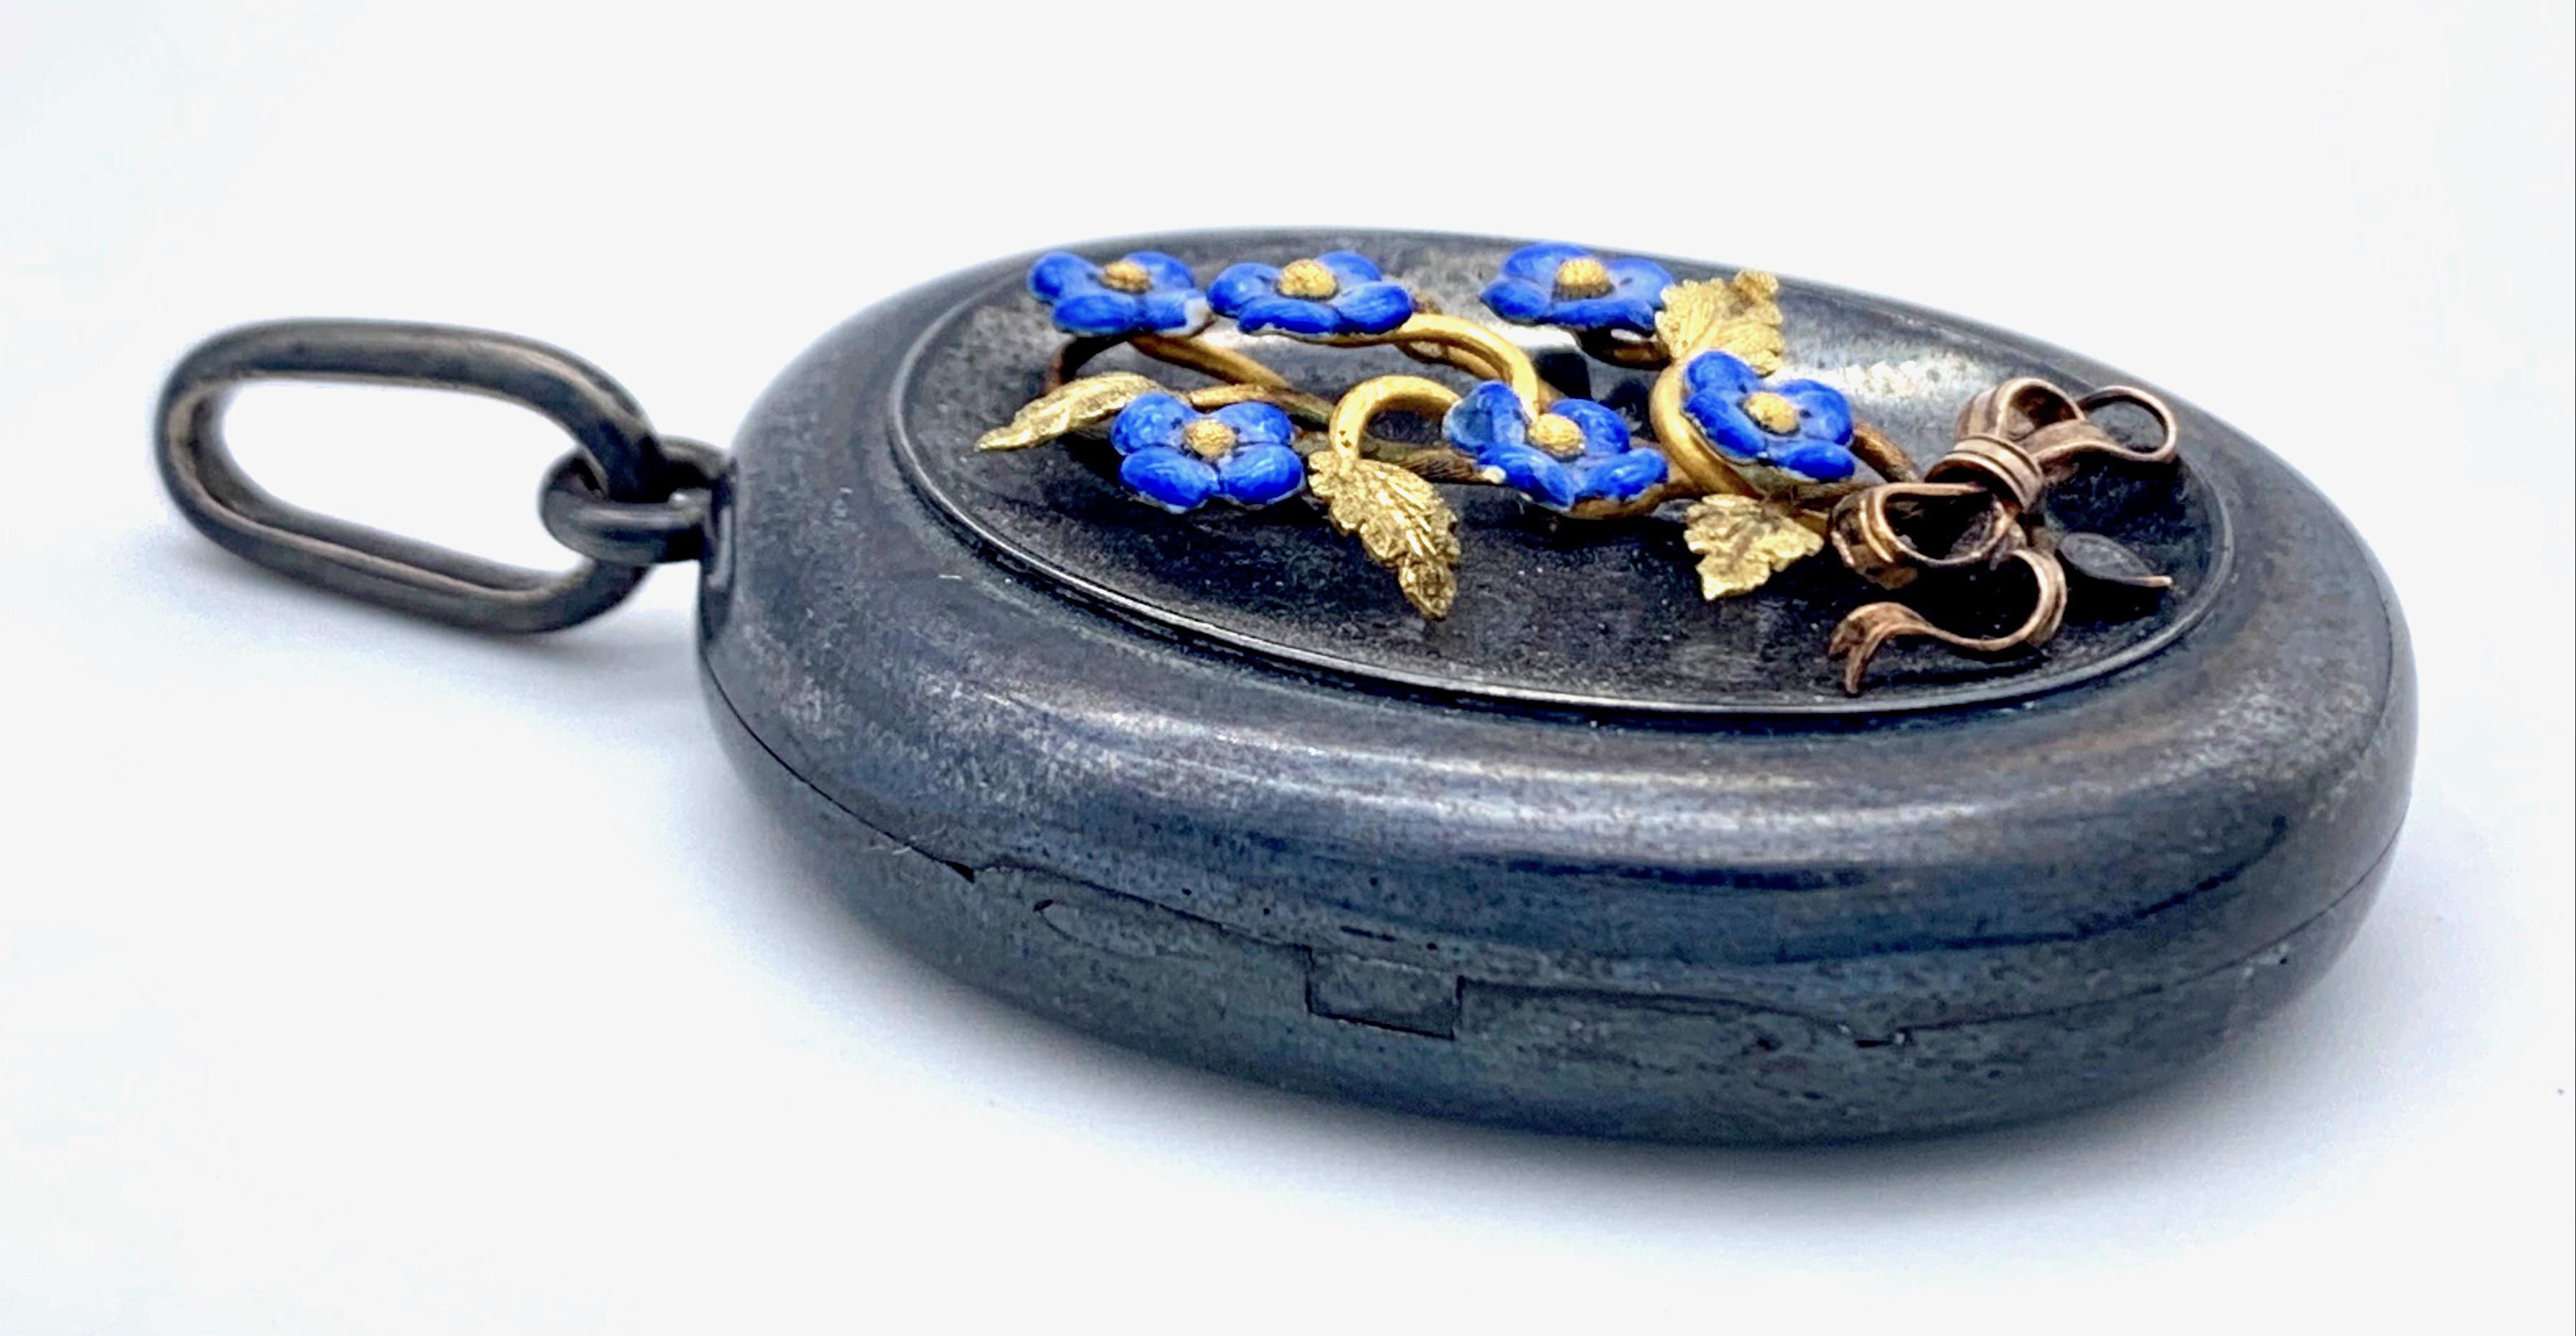 This wonderful locket features enamelled forget me nots arranged to a flower bouquet with finely engraved leaves in two colour gold gilded metal.